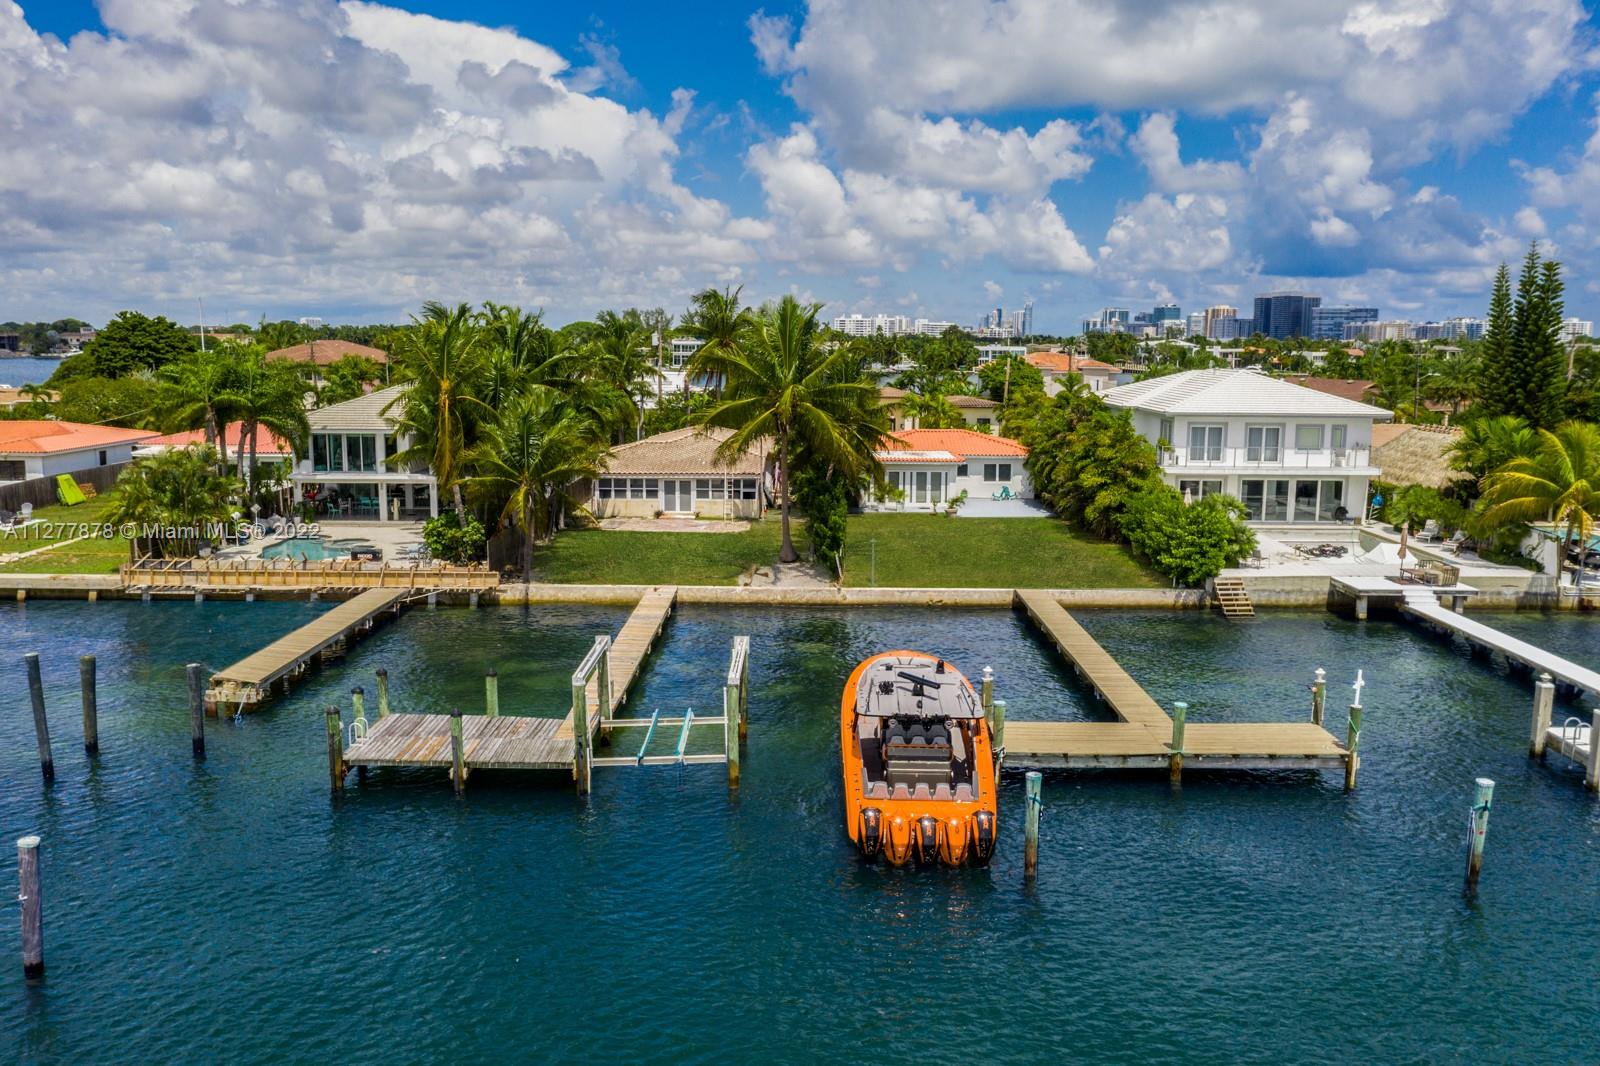 Incredible waterfront opportunity in the exclusive gated community of Stillwater in the heart of Miami Beach. Live in this perfect condition charming home while you design your dream home or renovation. Features include a 50FT dock for yacht enthusiast, wide open waterfront views overlooking Downtown Miami and the intercoastal waterway, two oversized bedrooms, 1 car garage and circular driveway for an additional 4 cars. Adjacent Lot is available for sale for a dream land opportunity that would be a total of 16.000 SF and 100 FT of water frontage making it the second largest piece of land in the island. Call Listing Agent for showings.